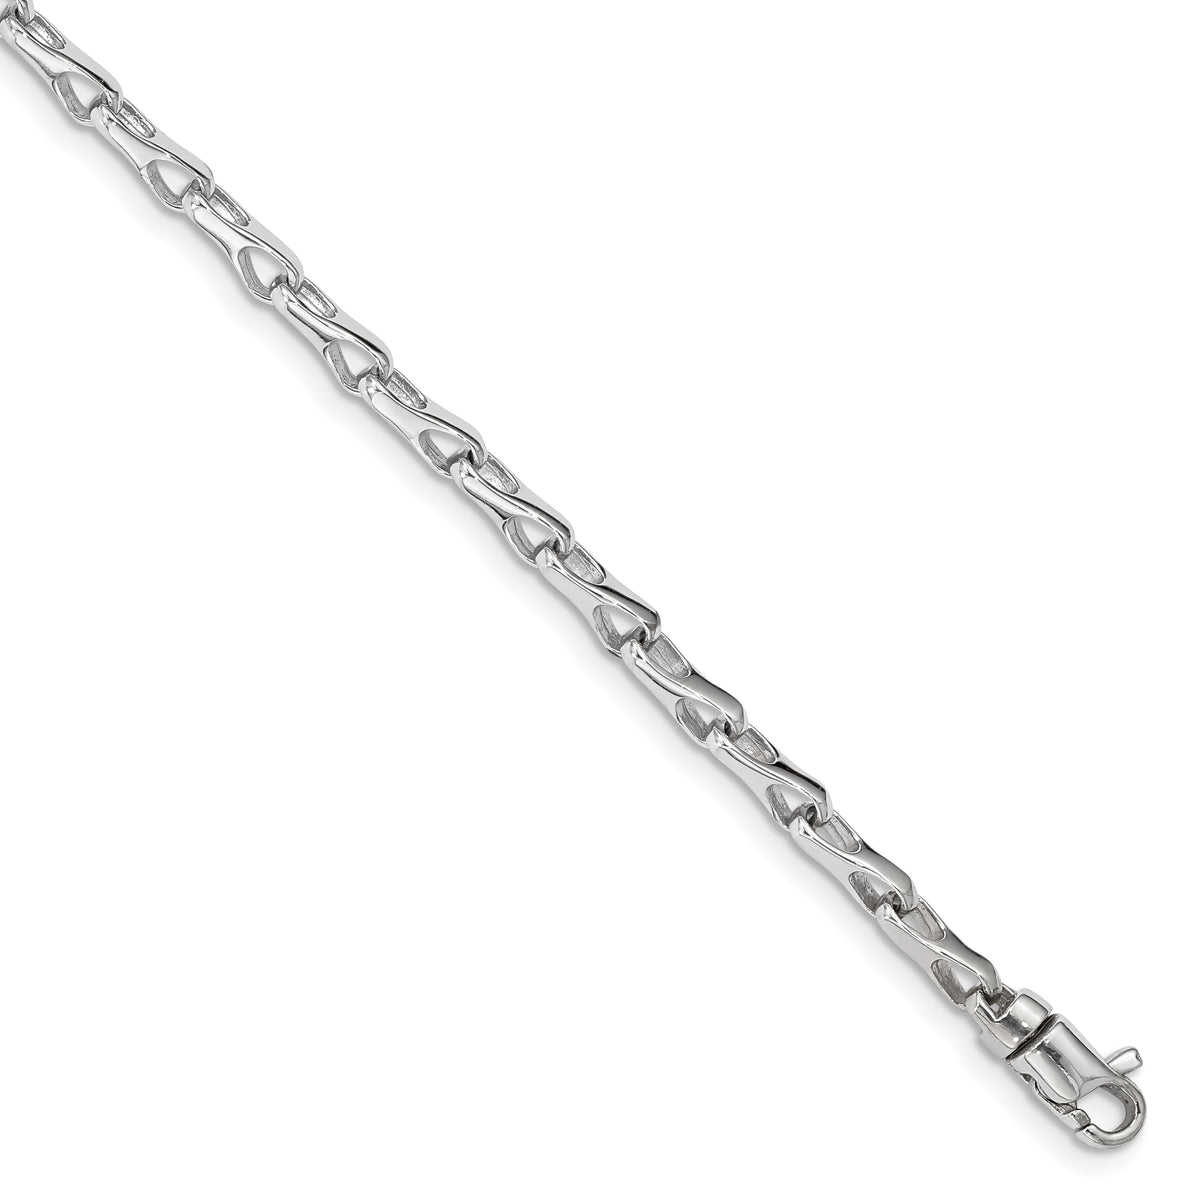 14K White Gold 7.25 inch 3.5mm Hand Polished Fancy Link with Lobster Clasp Bracelet